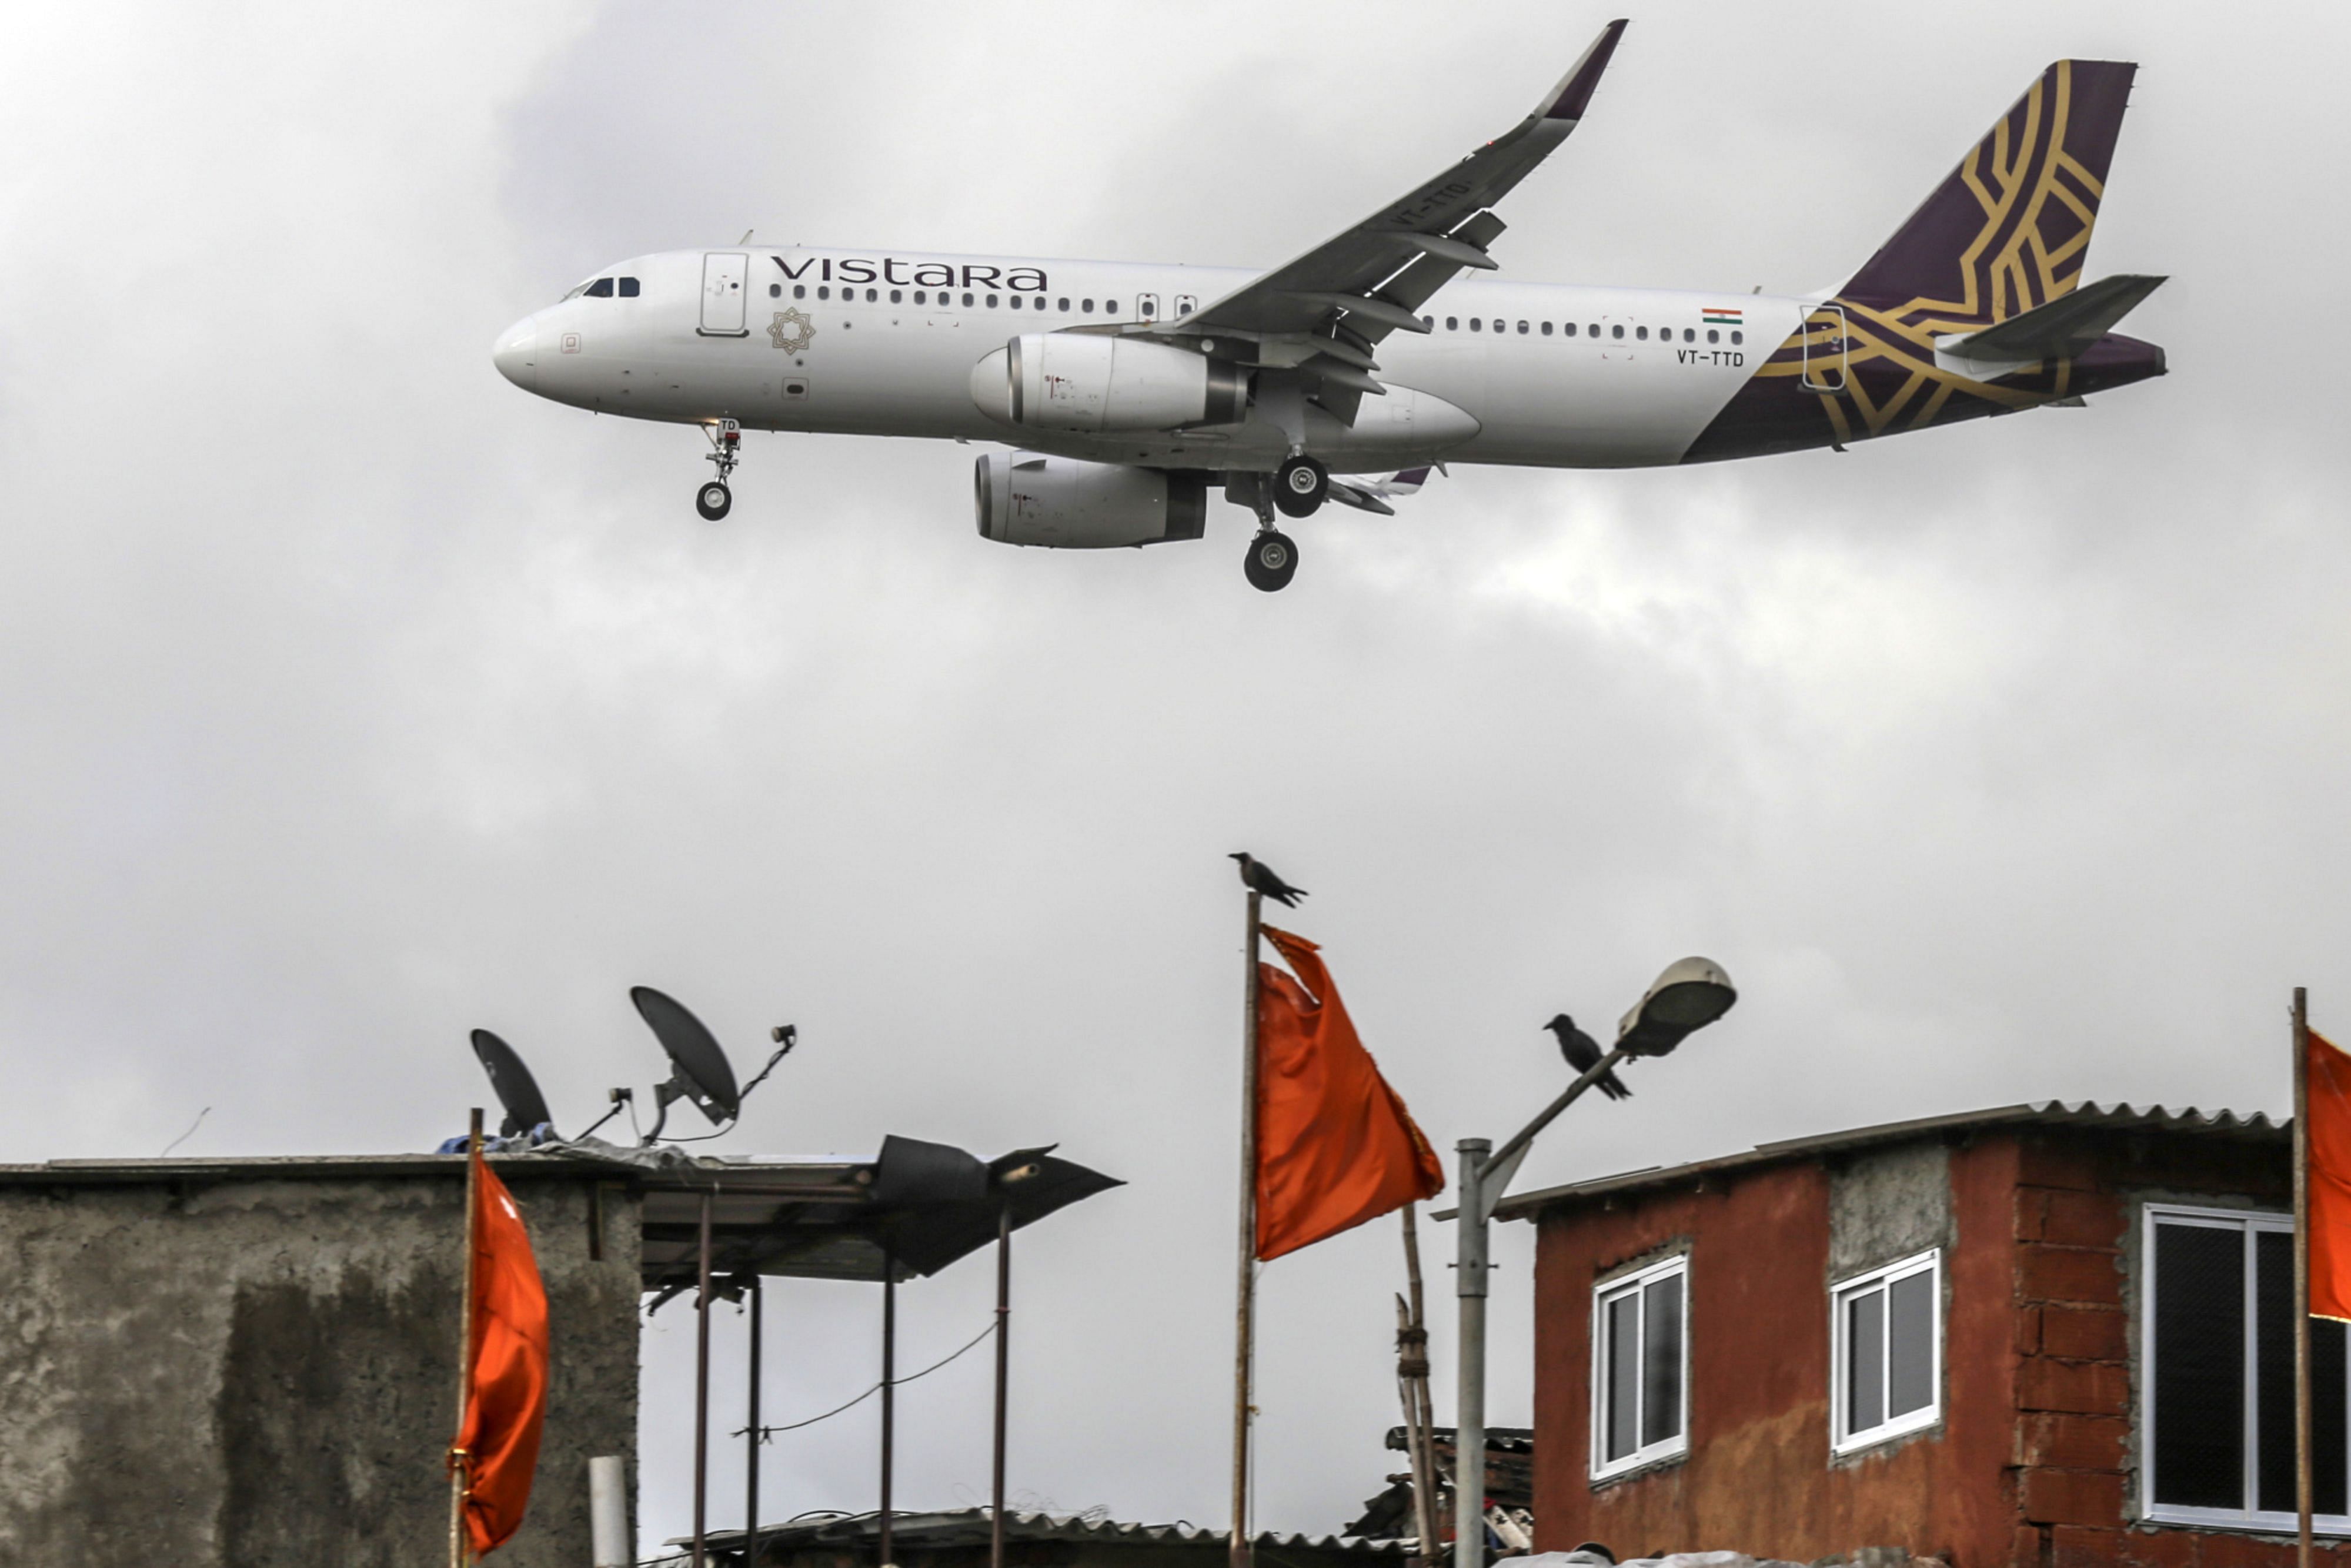 The carrier, a joint venture between Singapore Airlines and Tata Group, started flying in 2015 and currently operates 32 Airbus A320s and seven Boeing 737s. Credit: Bloomberg